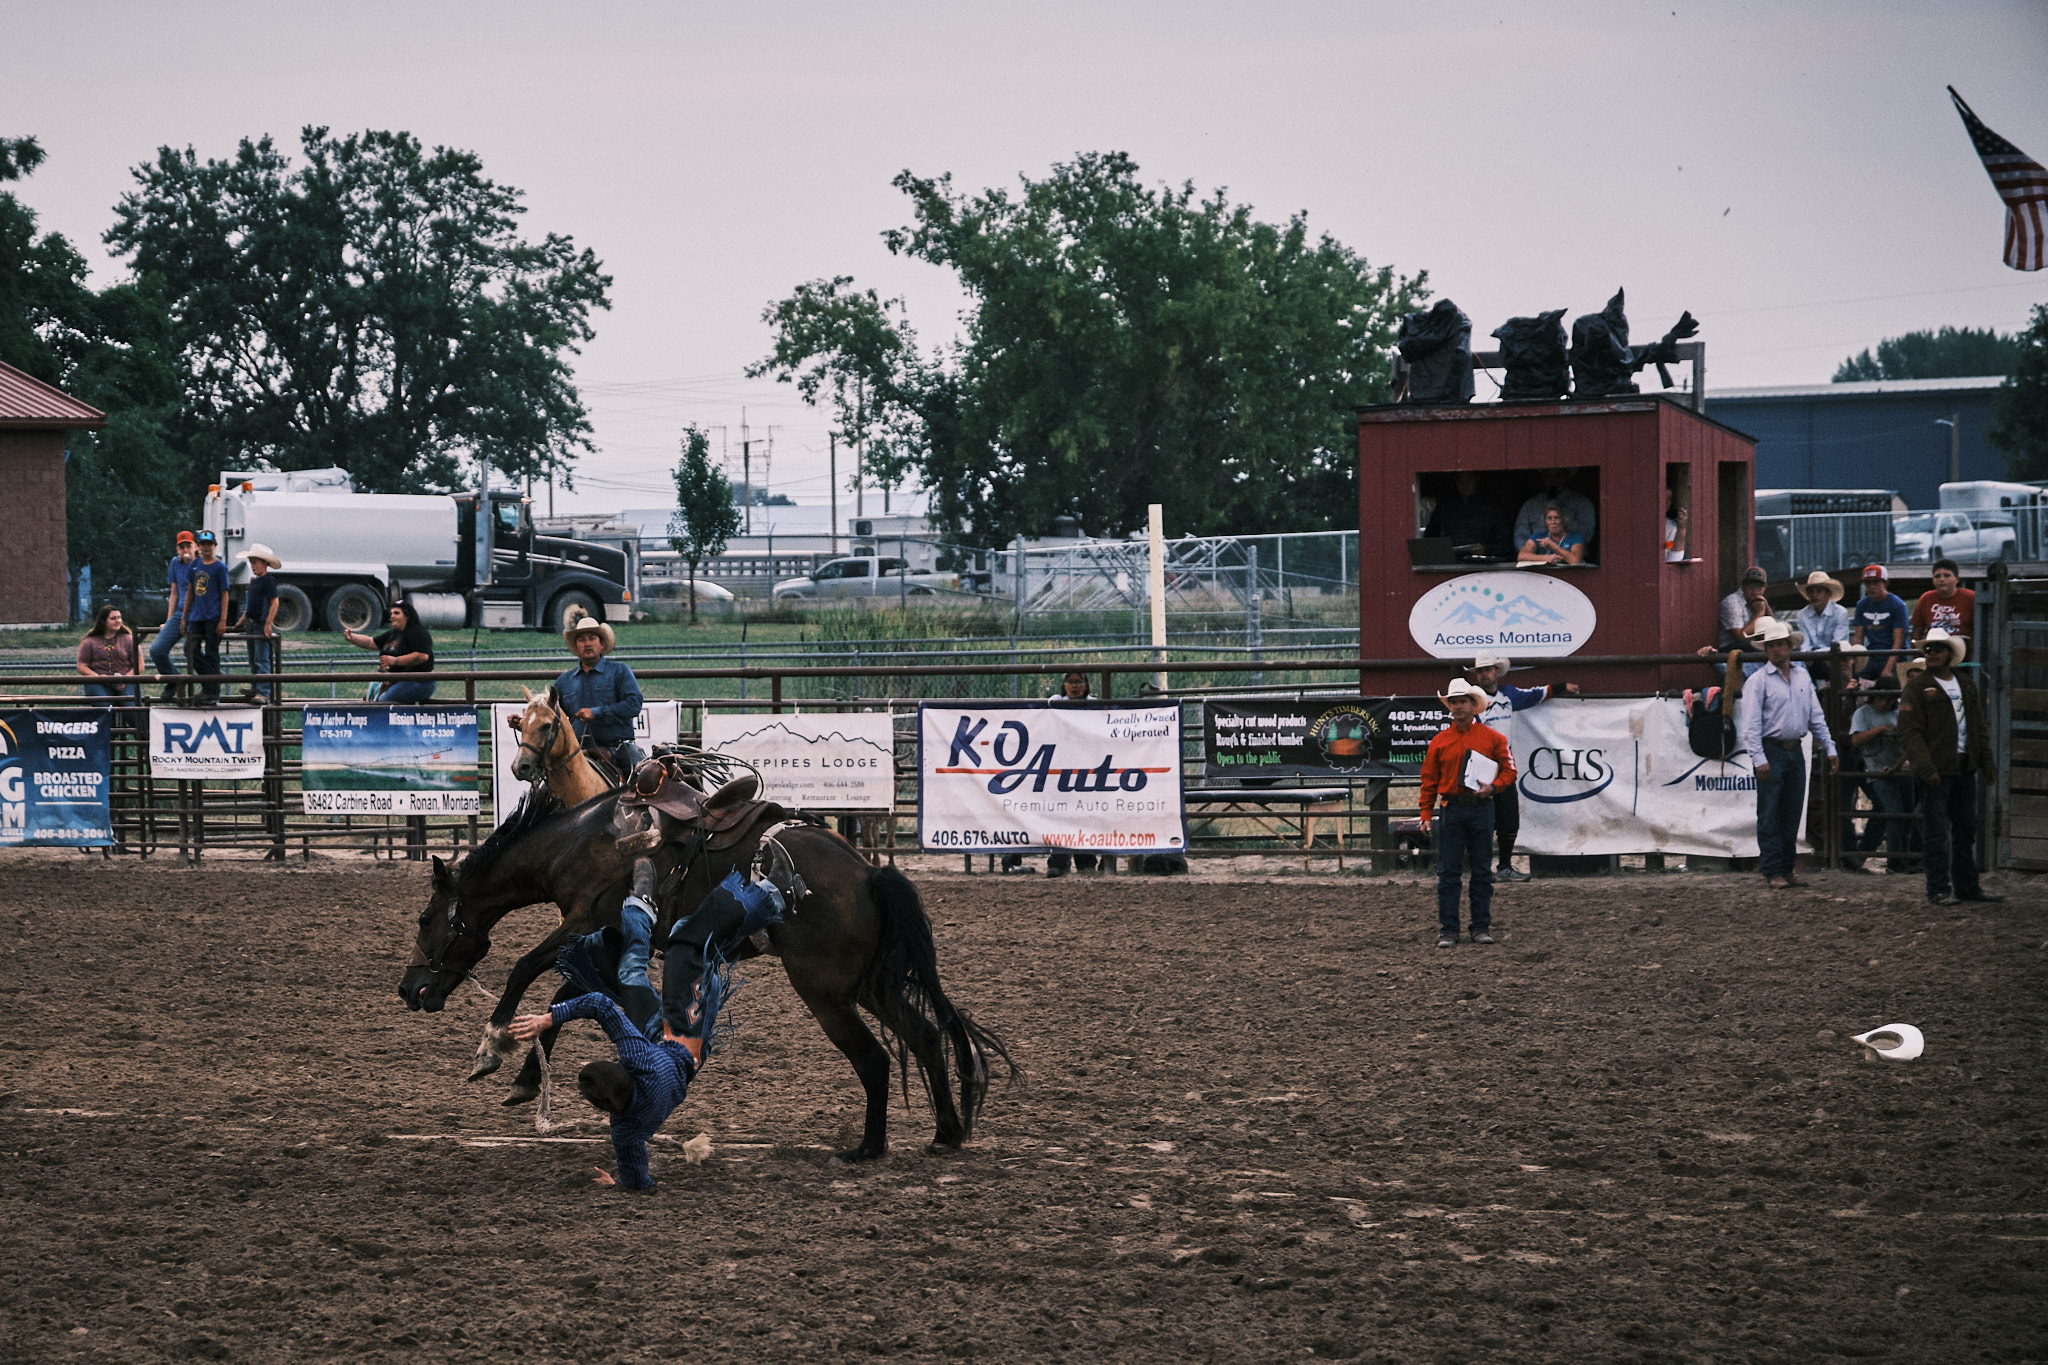 A cowboy falling off his horse and landing on his left arm first